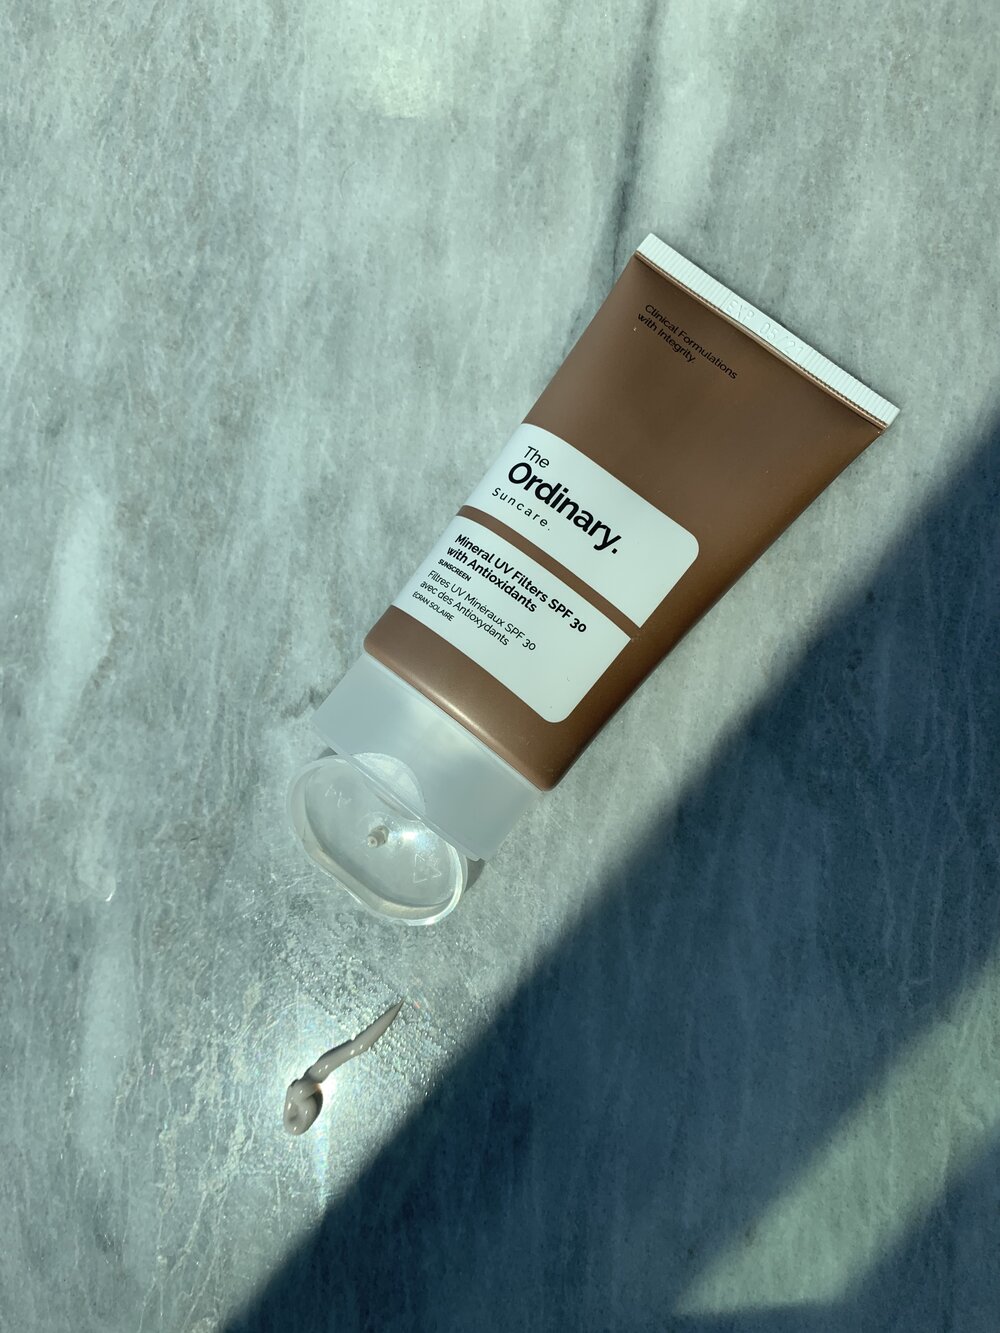 Overlevelse Uhyggelig tage medicin PRODUCT REVIEW: THE ORDINARY MINERAL UV FILTERS SPF 30 WITH ANTIOXIDANTS -  BEST MINERAL SUNSCREEN